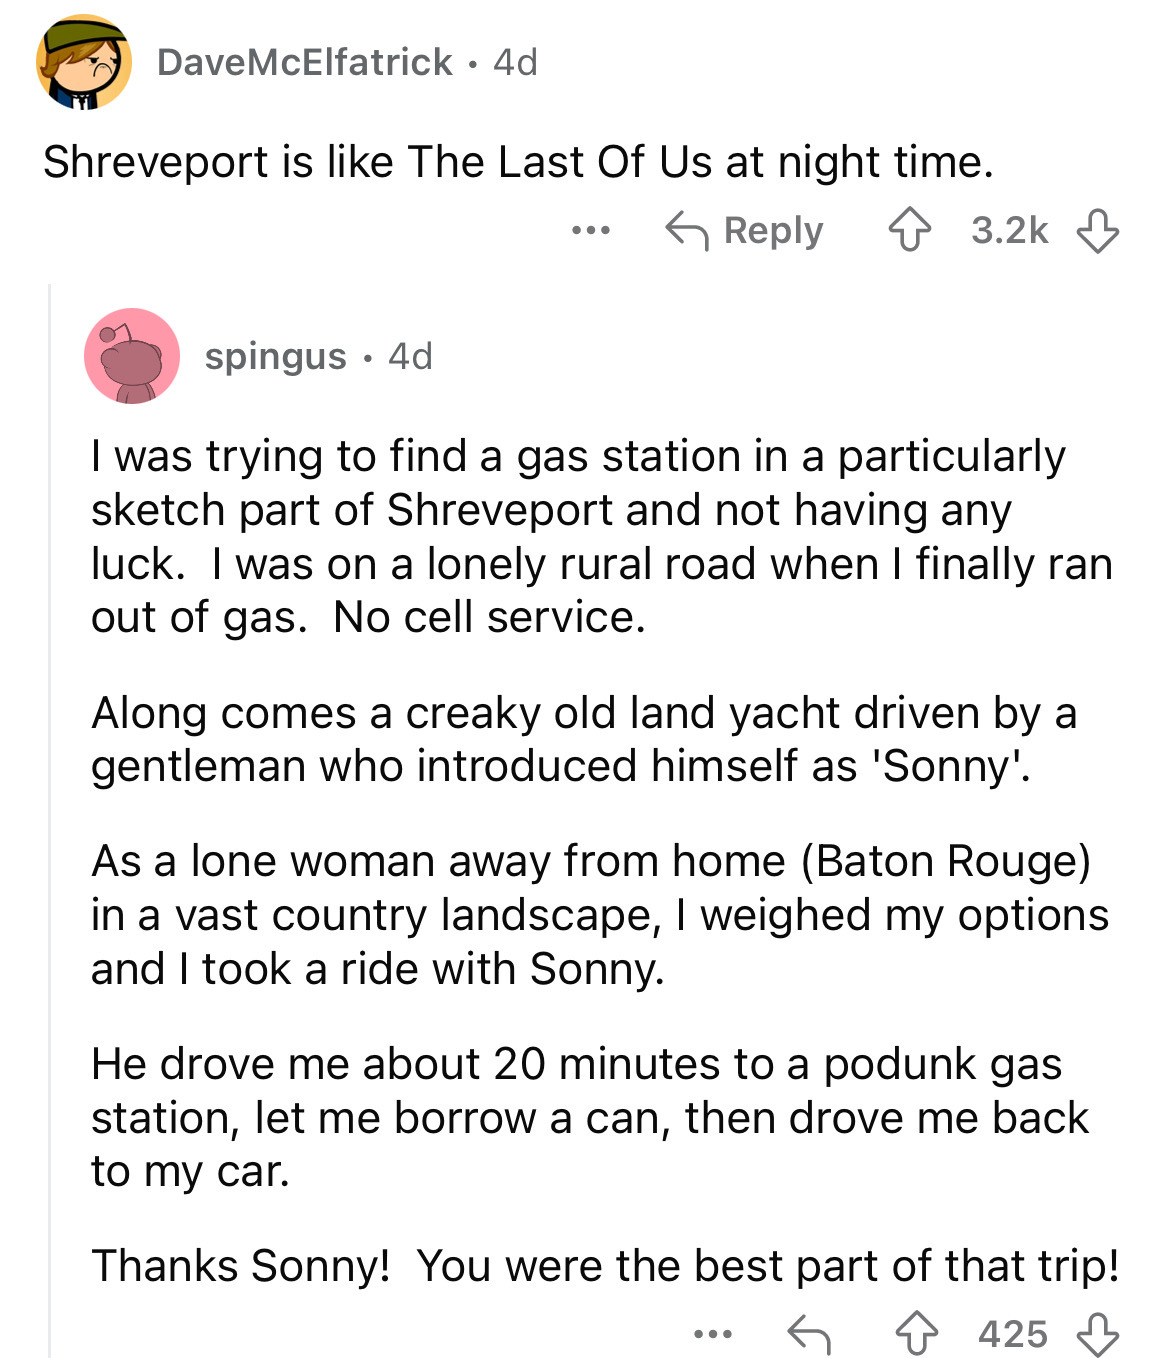 document - Dave McElfatrick 4d Shreveport is The Last Of Us at night time. spingus 4d ... I was trying to find a gas station in a particularly sketch part of Shreveport and not having any luck. I was on a lonely rural road when I finally ran out of gas. N